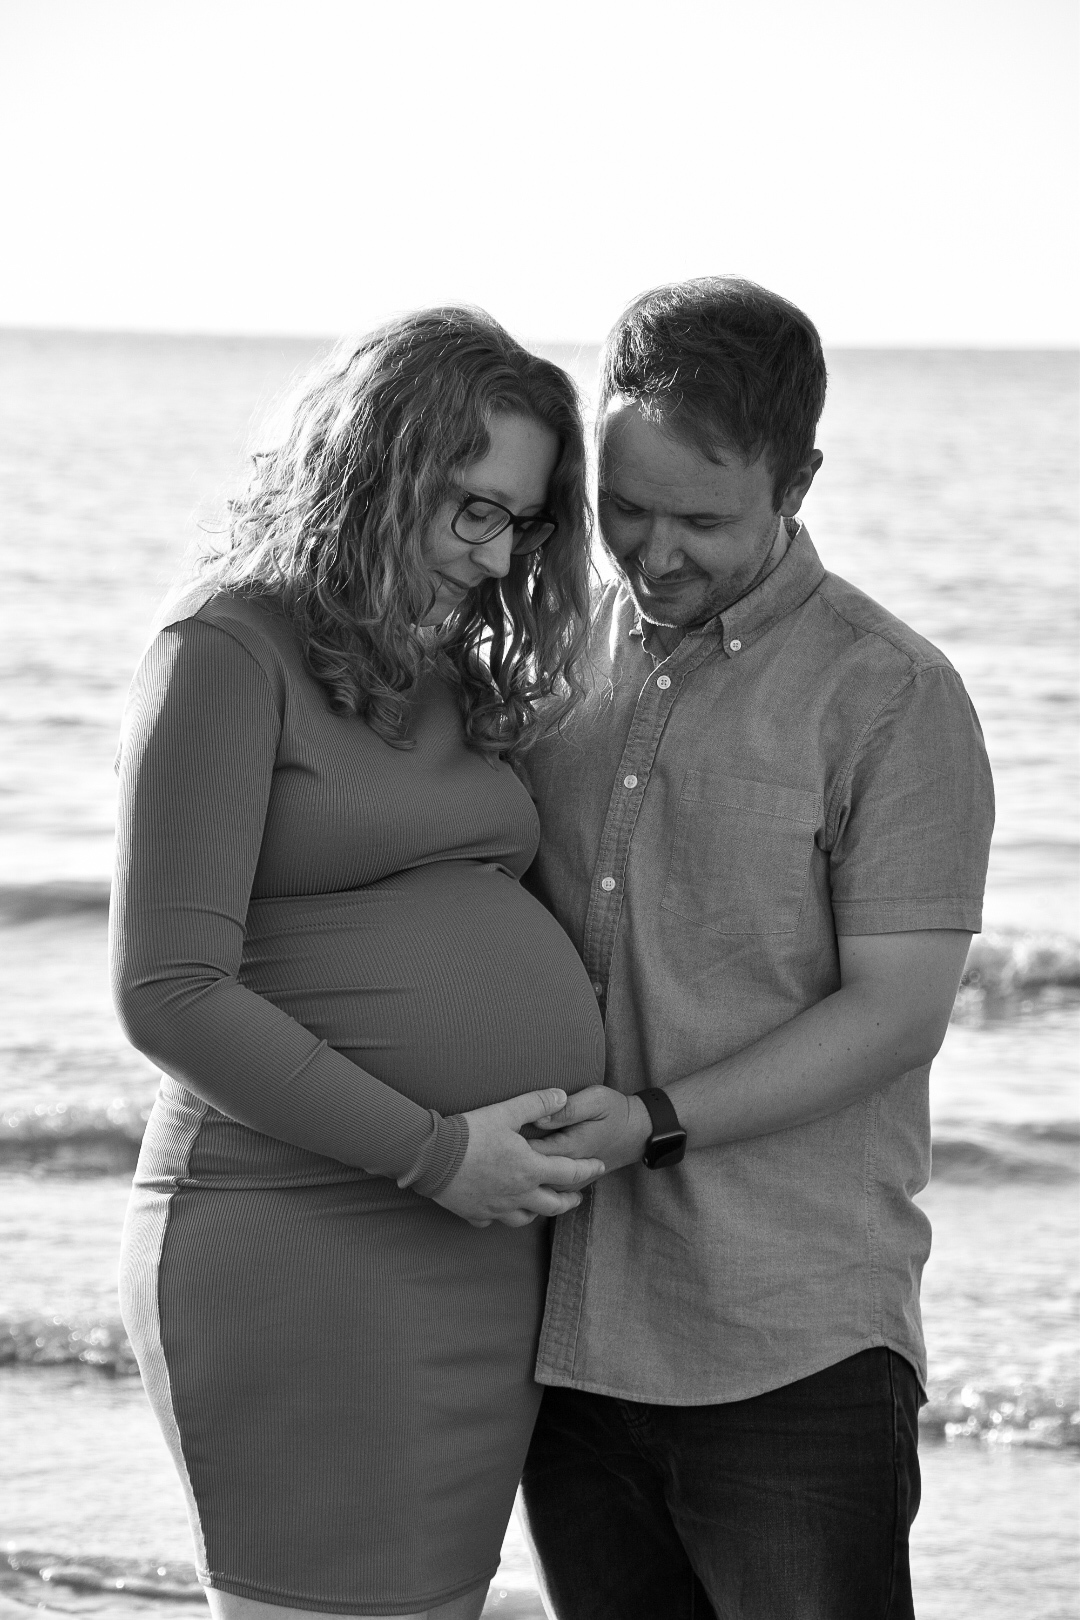 Maternity photoshoot for Emily and Michael Hannah, at Talacre beach.